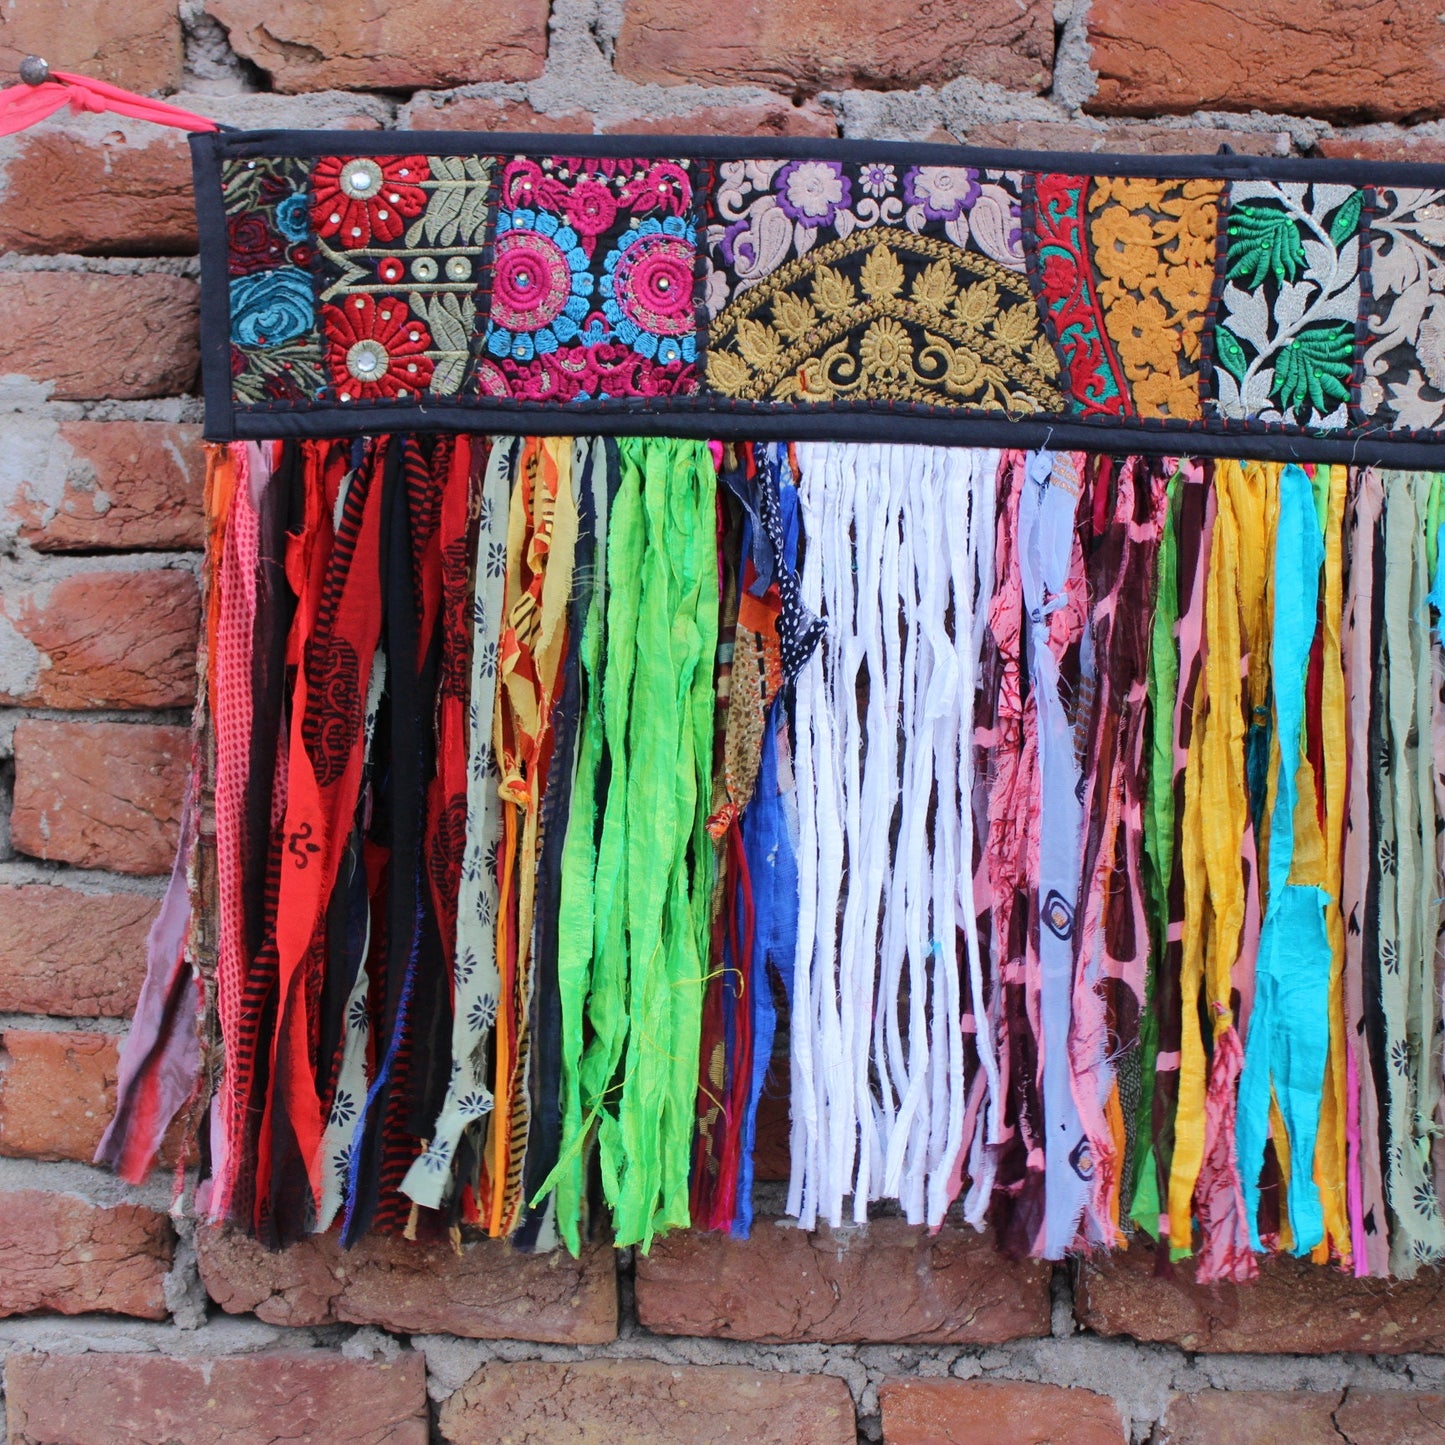 Just In Bohemian Decor Window Valance Hippie Curtains Wall Hanging Art Decor Bedroom Decor Boho Home Decor Housewarming Gift Unique Gift